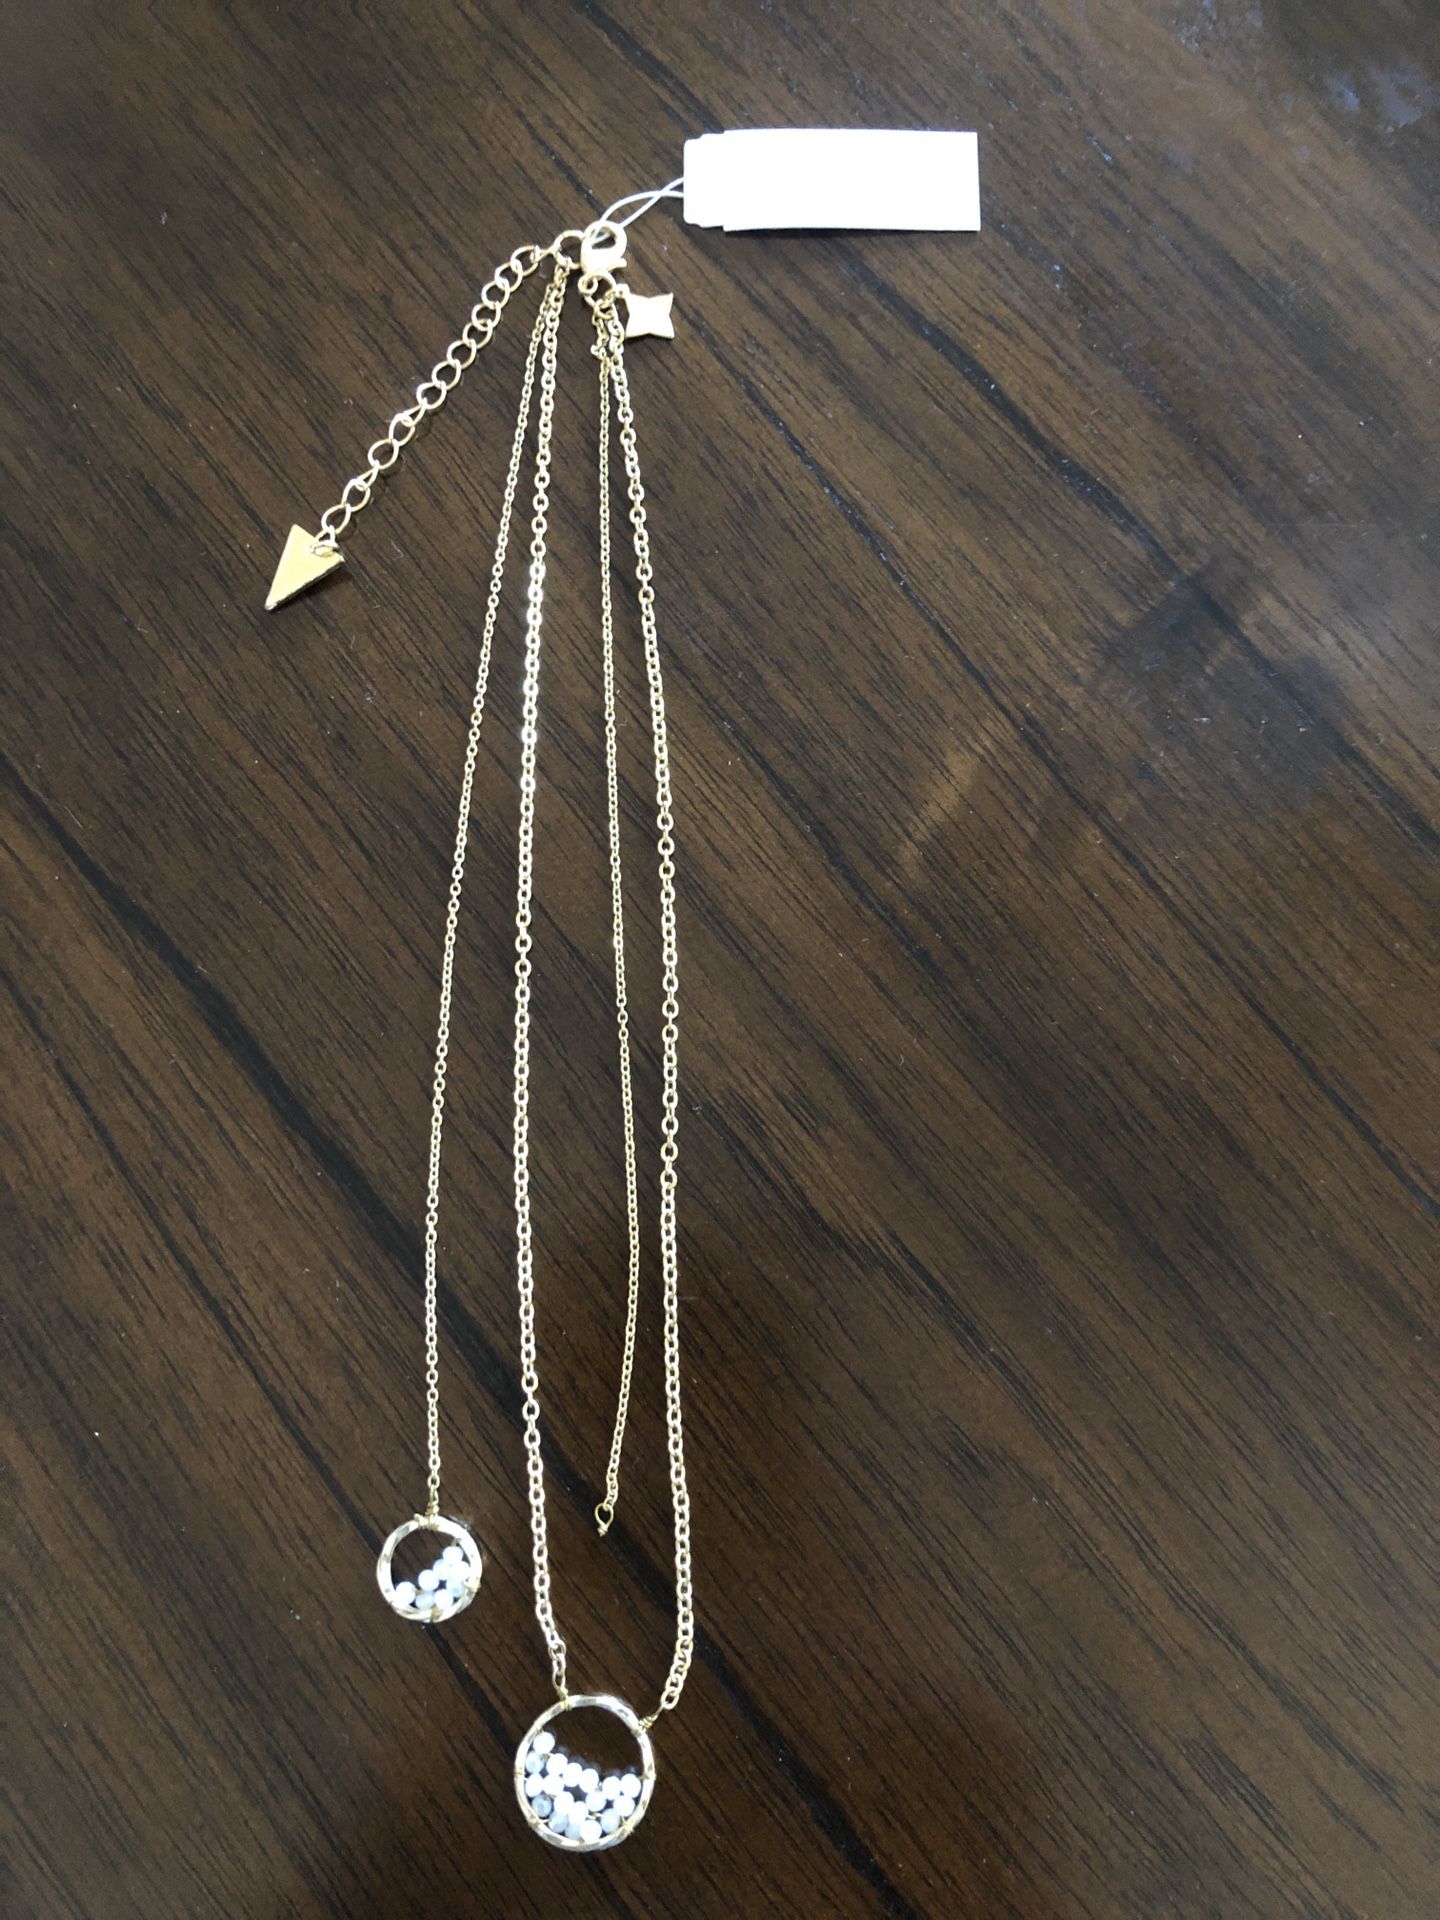 PANACEA necklace with tags